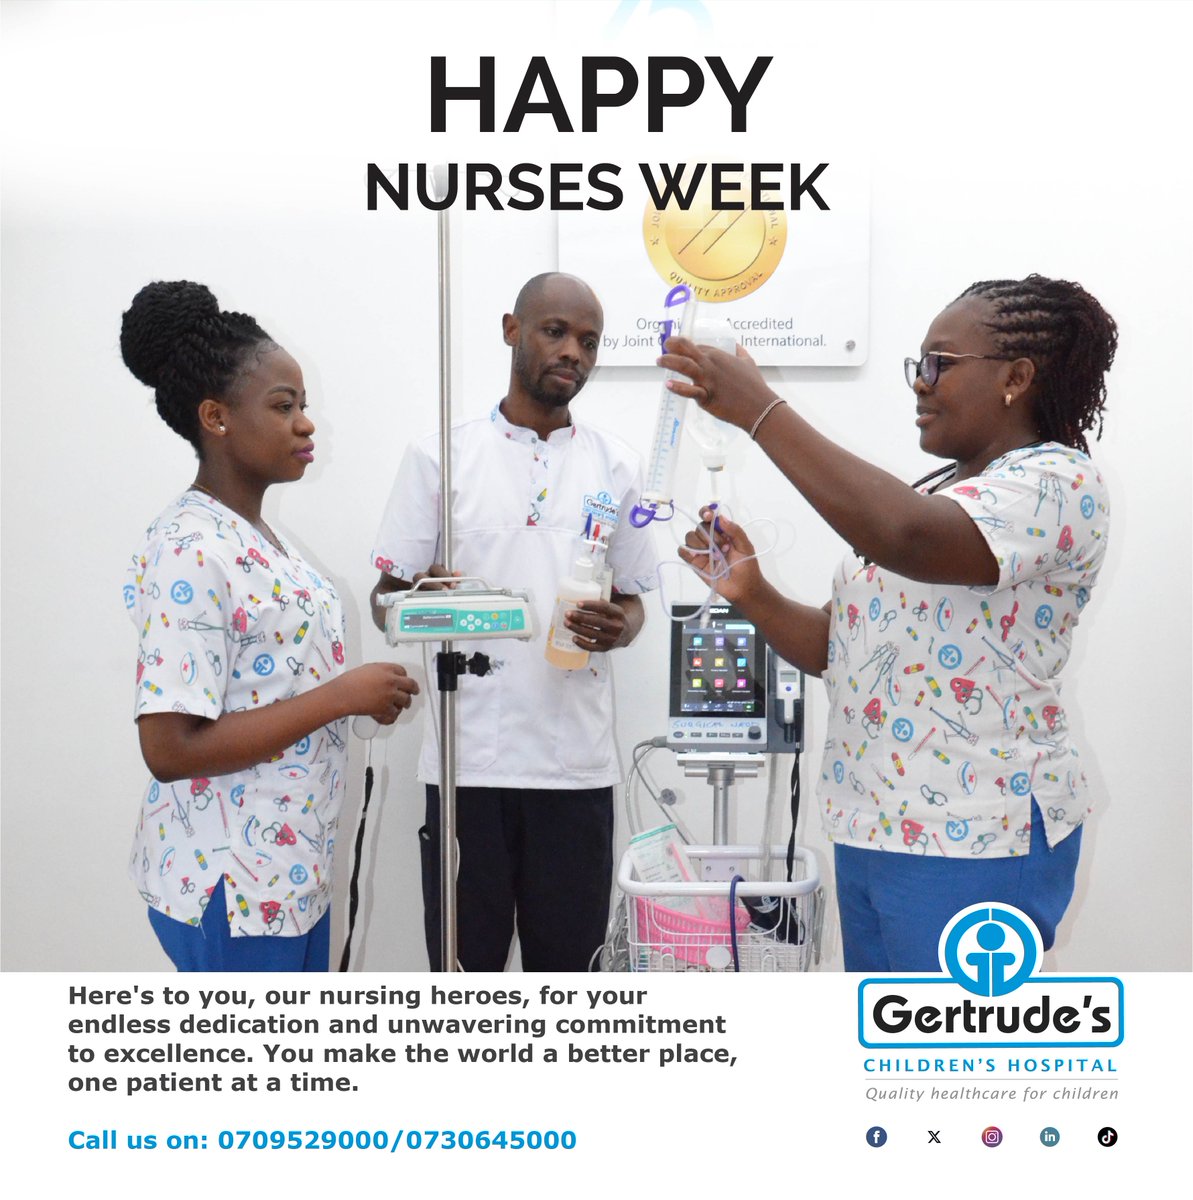 This Nurses Week, we celebrate the superheroes in our midst – our extraordinary nurses! Your kindness, expertise, and selflessness shine bright, illuminating the path to healing for countless patients. You make the world a better place, one patient at a time. Call 0709529000.